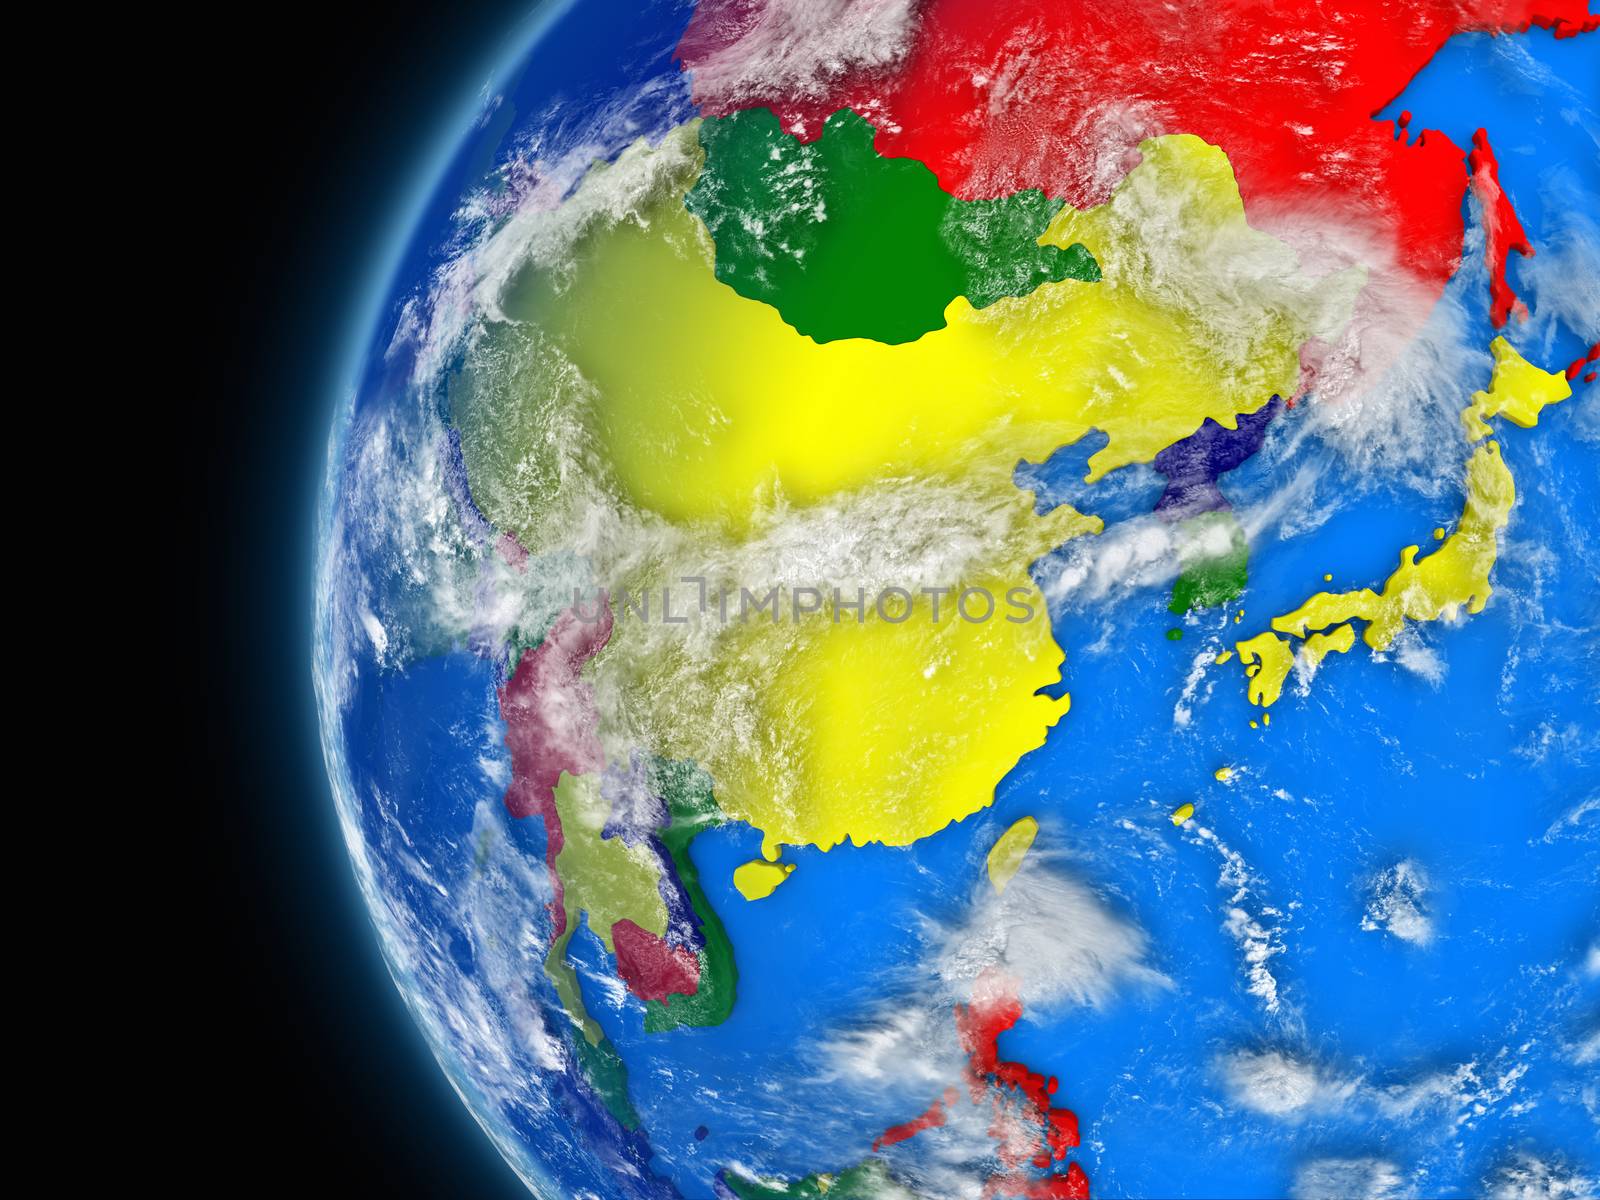 Illustration of east Asia region on political globe with atmospheric features and clouds